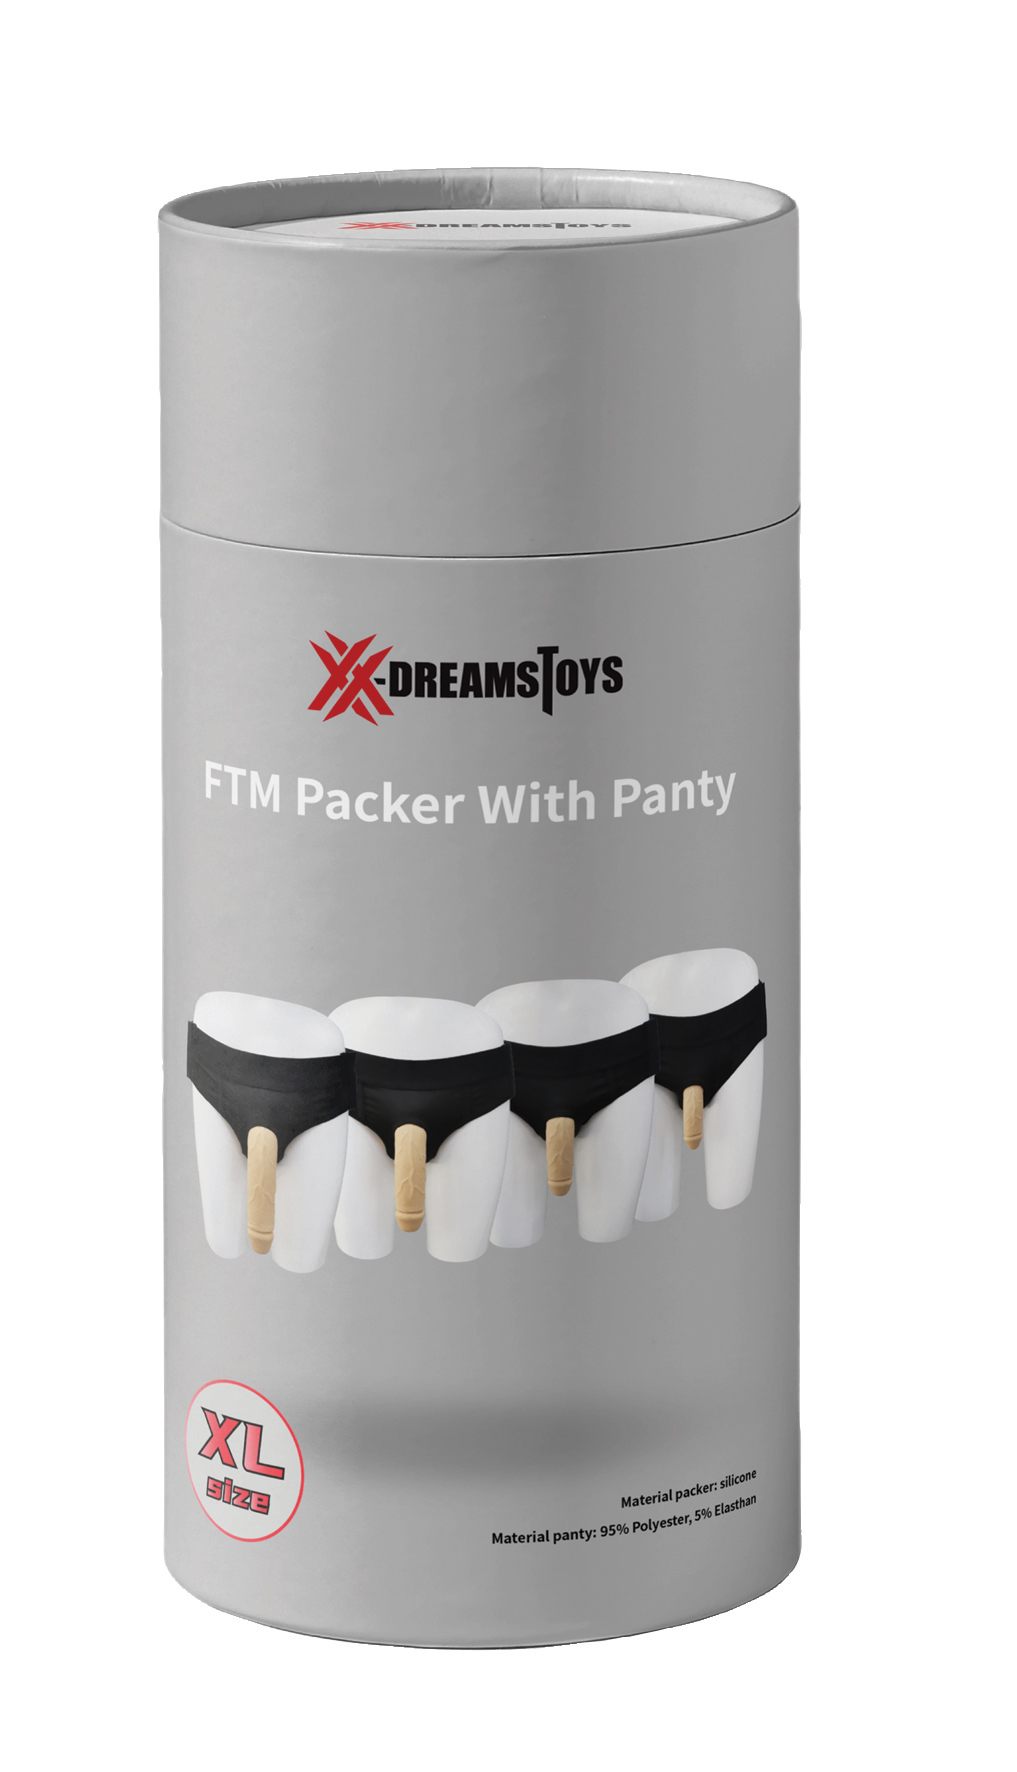 XX-DREAMSTOYS FTM Packer with panty Size XL